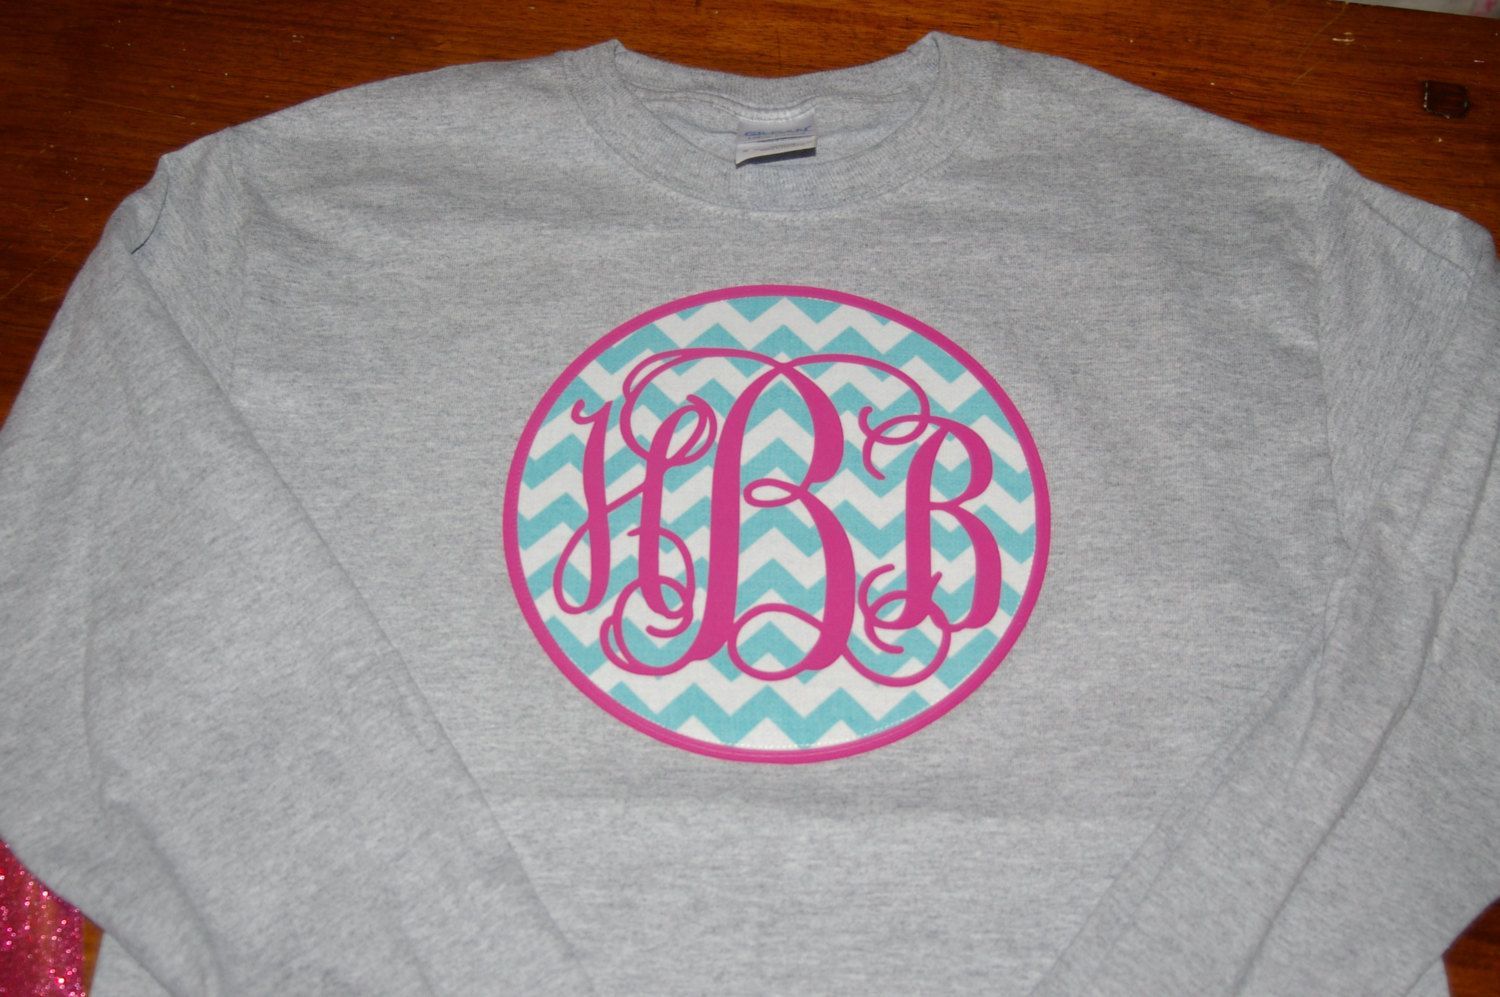 Would be cute on a pullover…Monogram Applique Chevron T-Shirt Womens. $17.00,